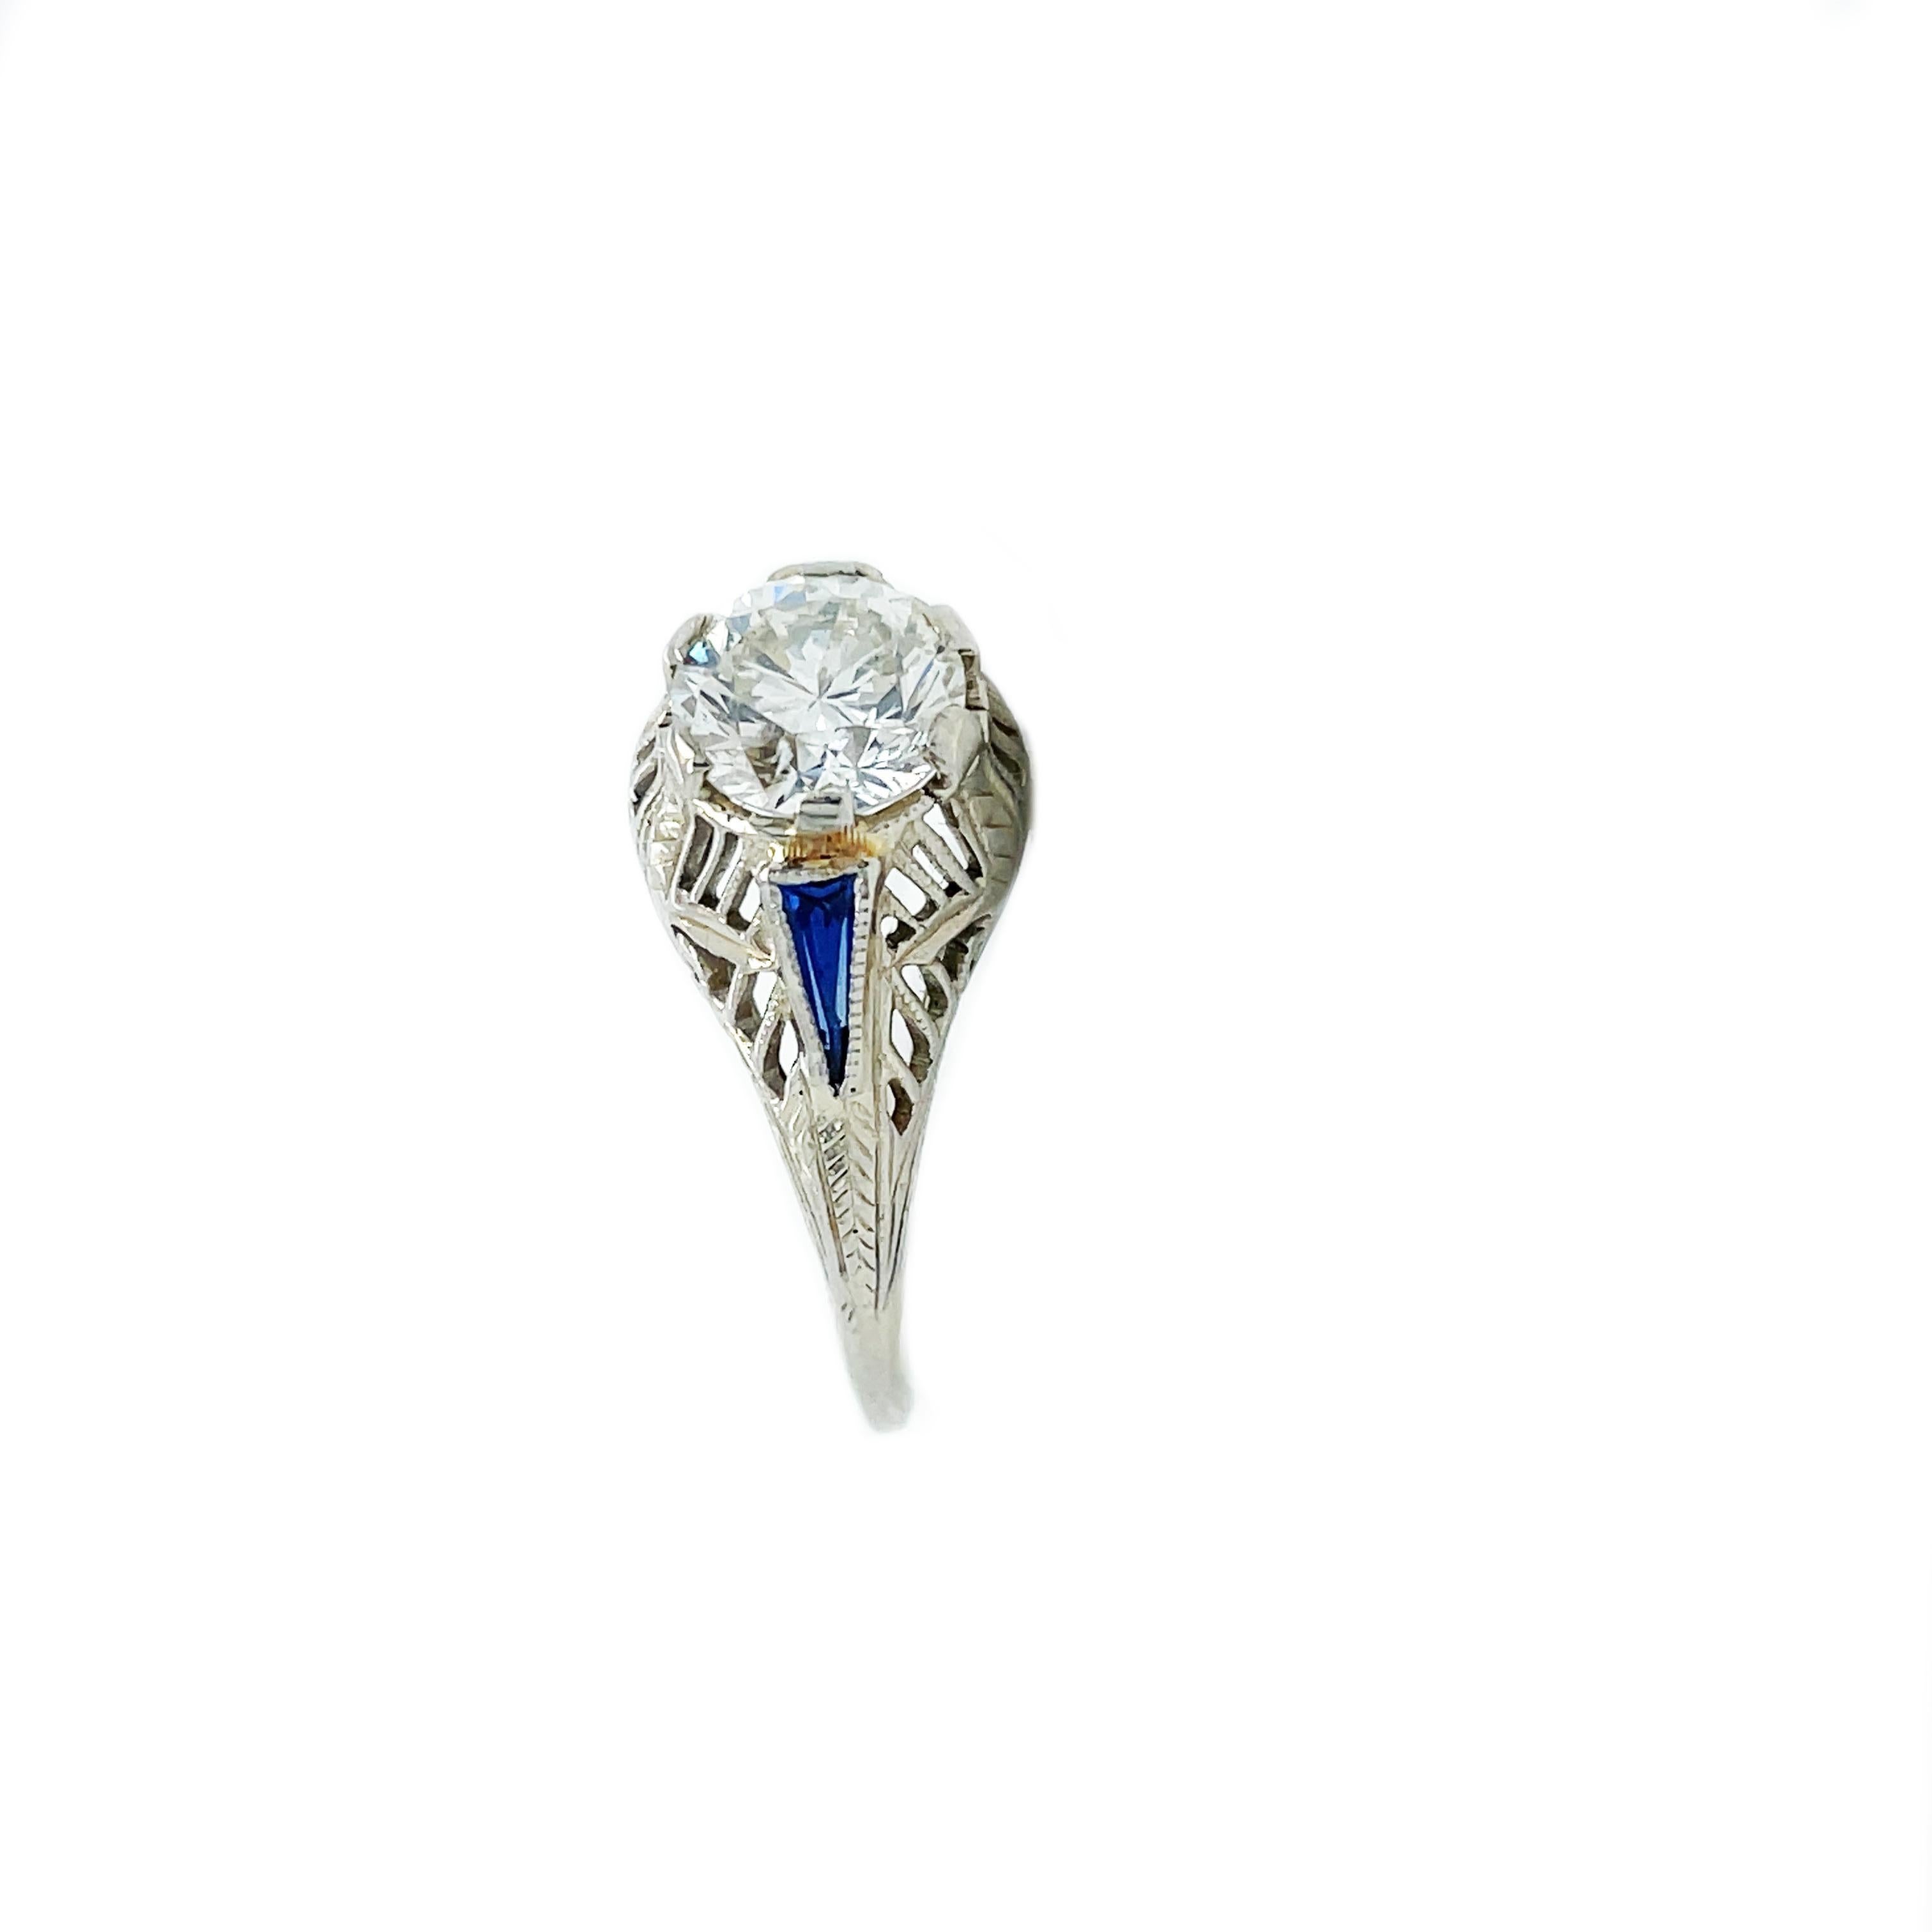 1925 Art Deco Diamond and Sapphire White Gold Ring with AGS Report For Sale 3